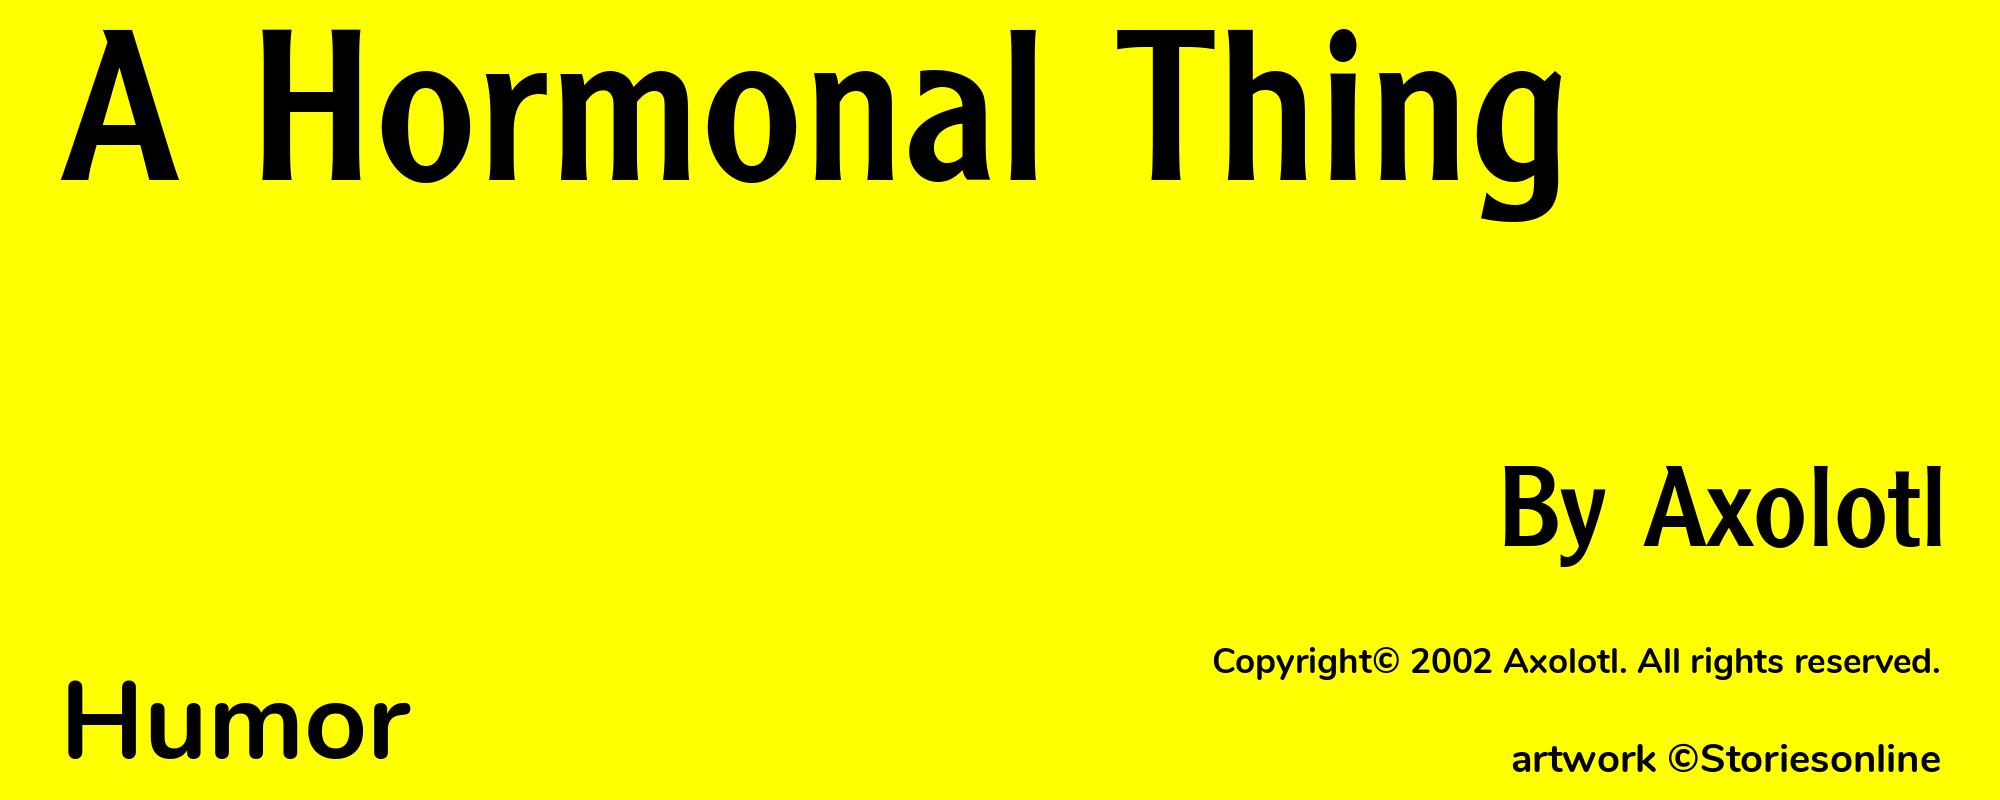 A Hormonal Thing - Cover